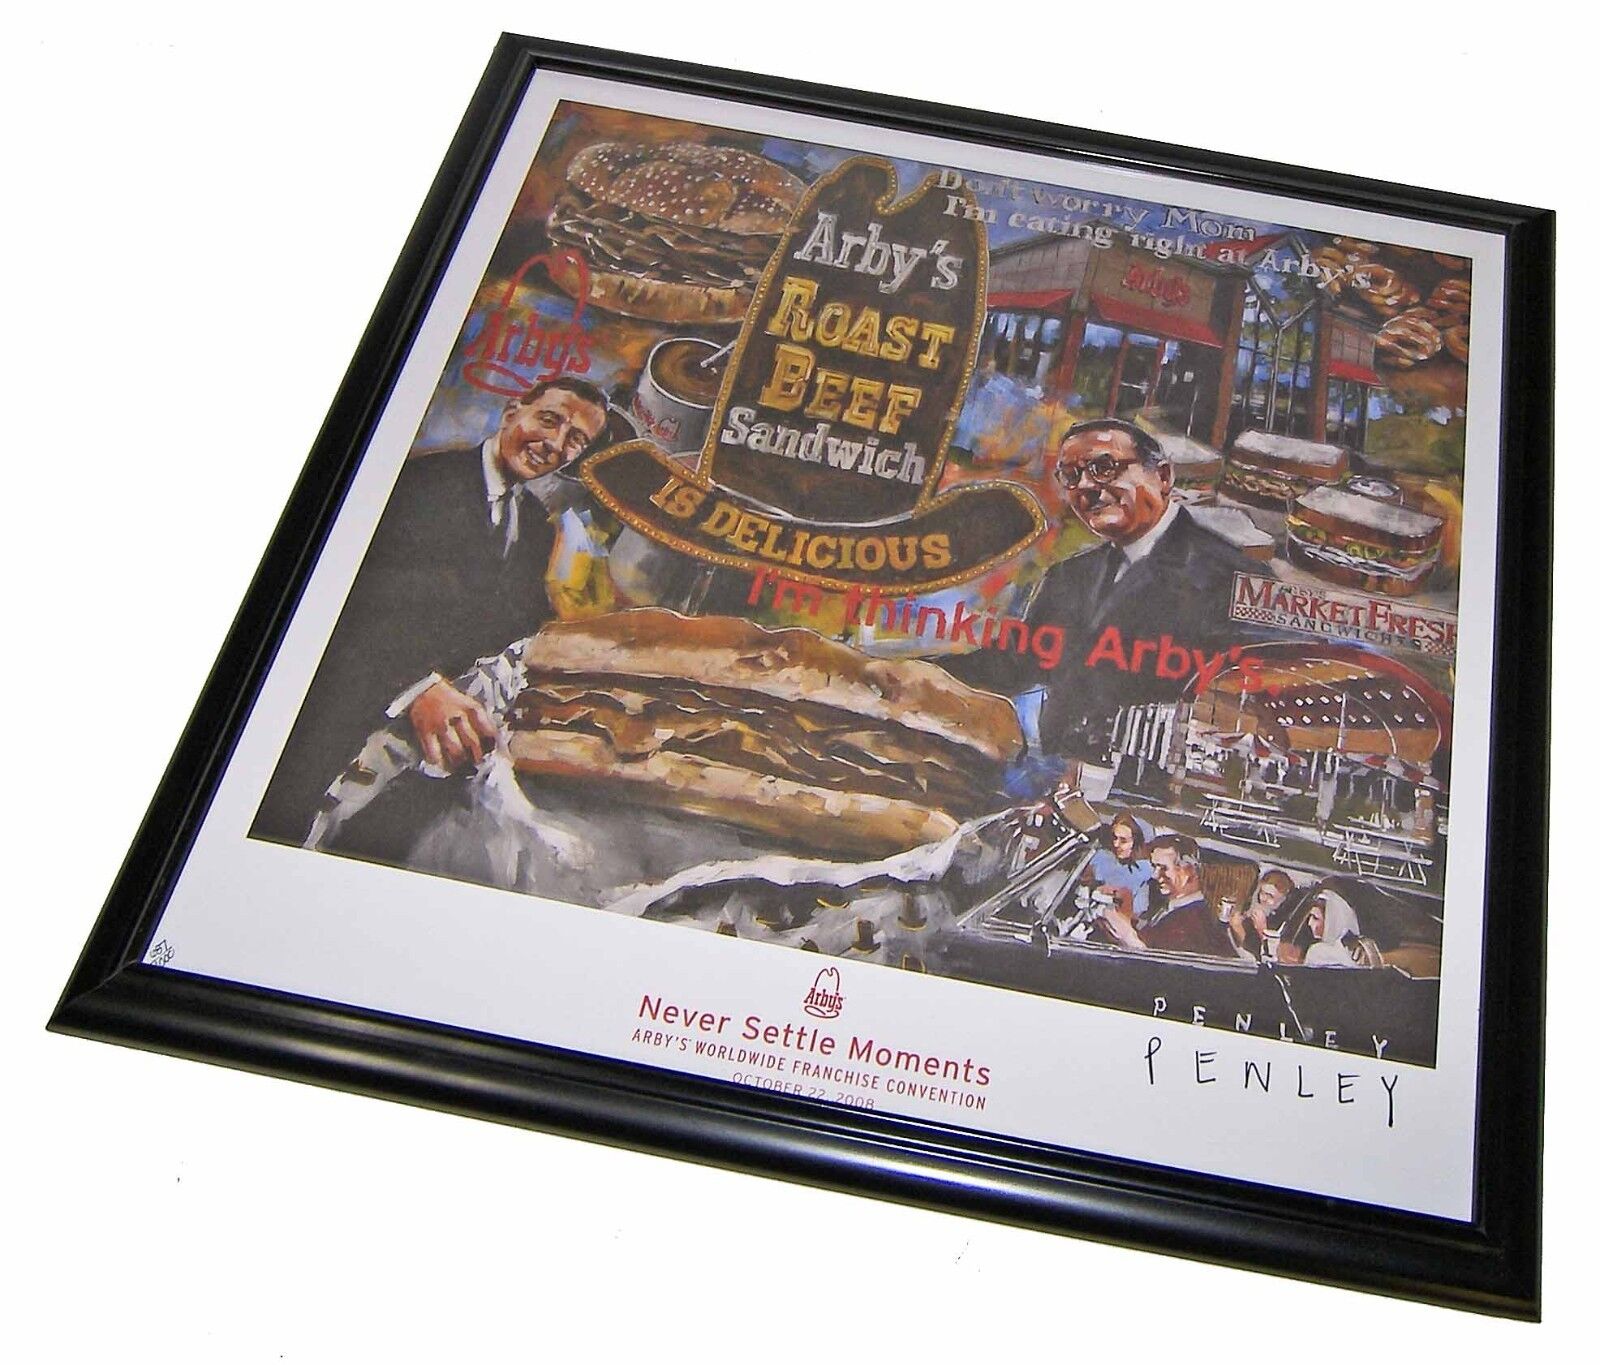 【RARE】Arby's "Never Settle Moments" Limited Edition Penley Signed Framed Print!